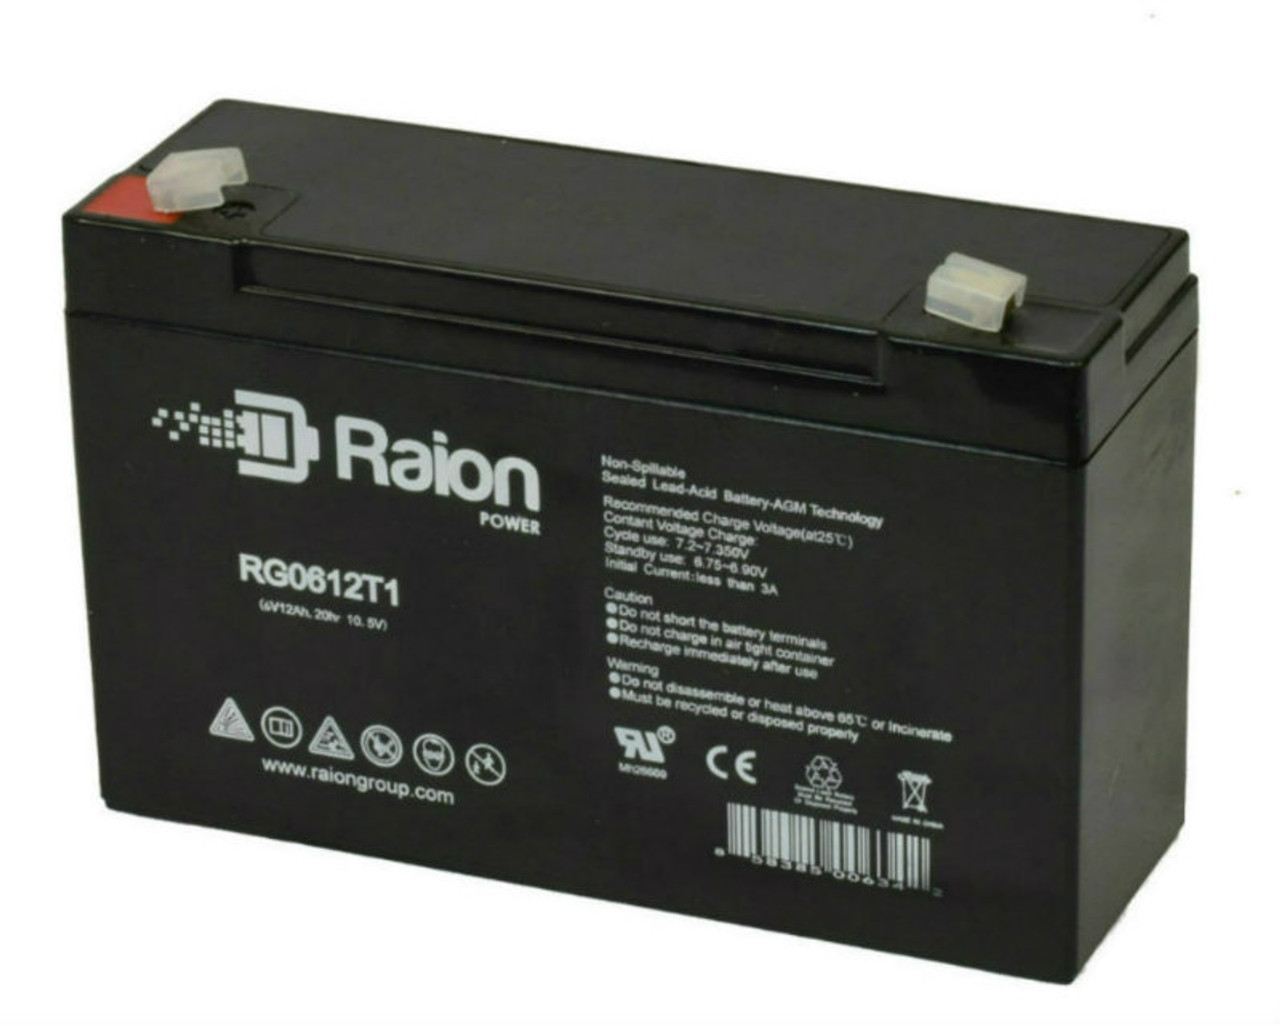 Raion Power RG06120T1 Replacement Emergency Light Battery for Para Systems 118-0013